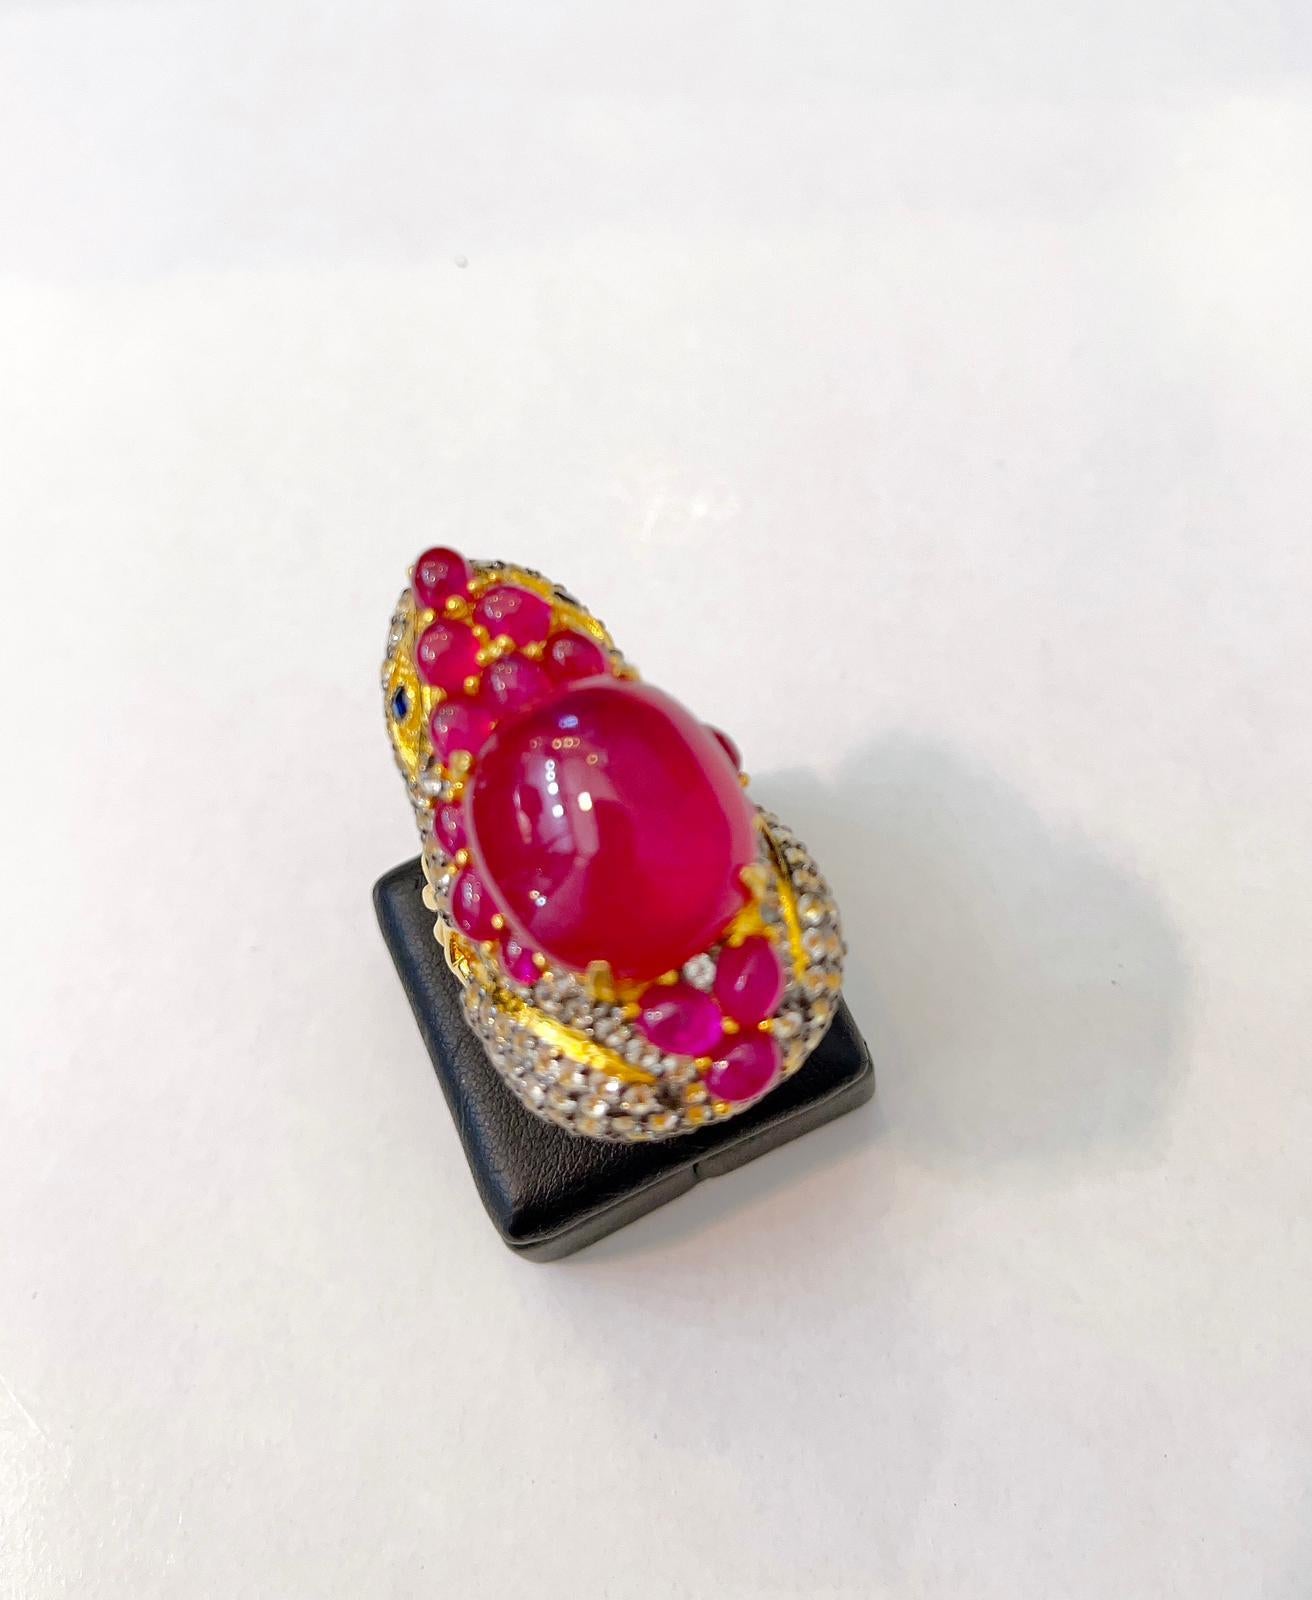 “Orient” Red Ruby & White Topaz Cocktail Ring Set in 22k Gold & Silver For Sale 5